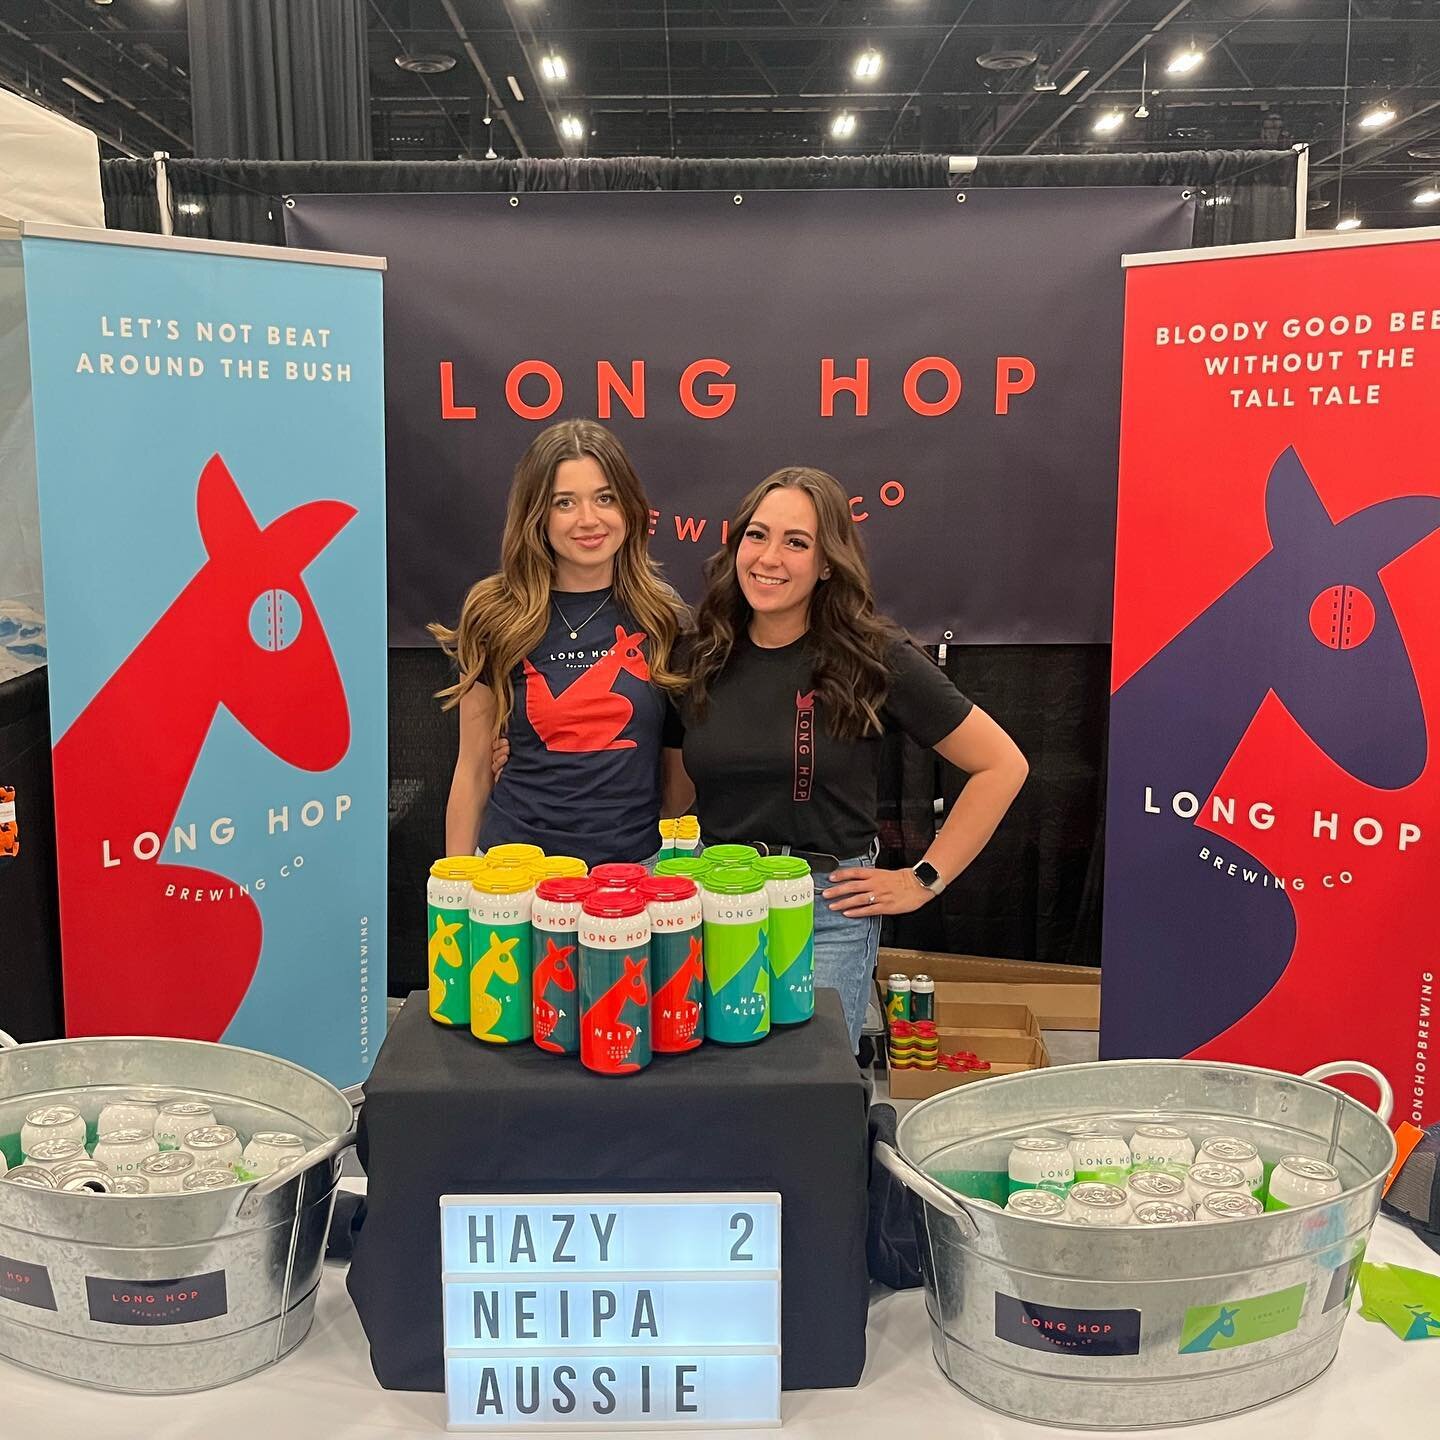 Come join us at @abbeerfestivals 

We have the Hazy Pale Ale, NEIPA, and Aussie Ale for you to try!